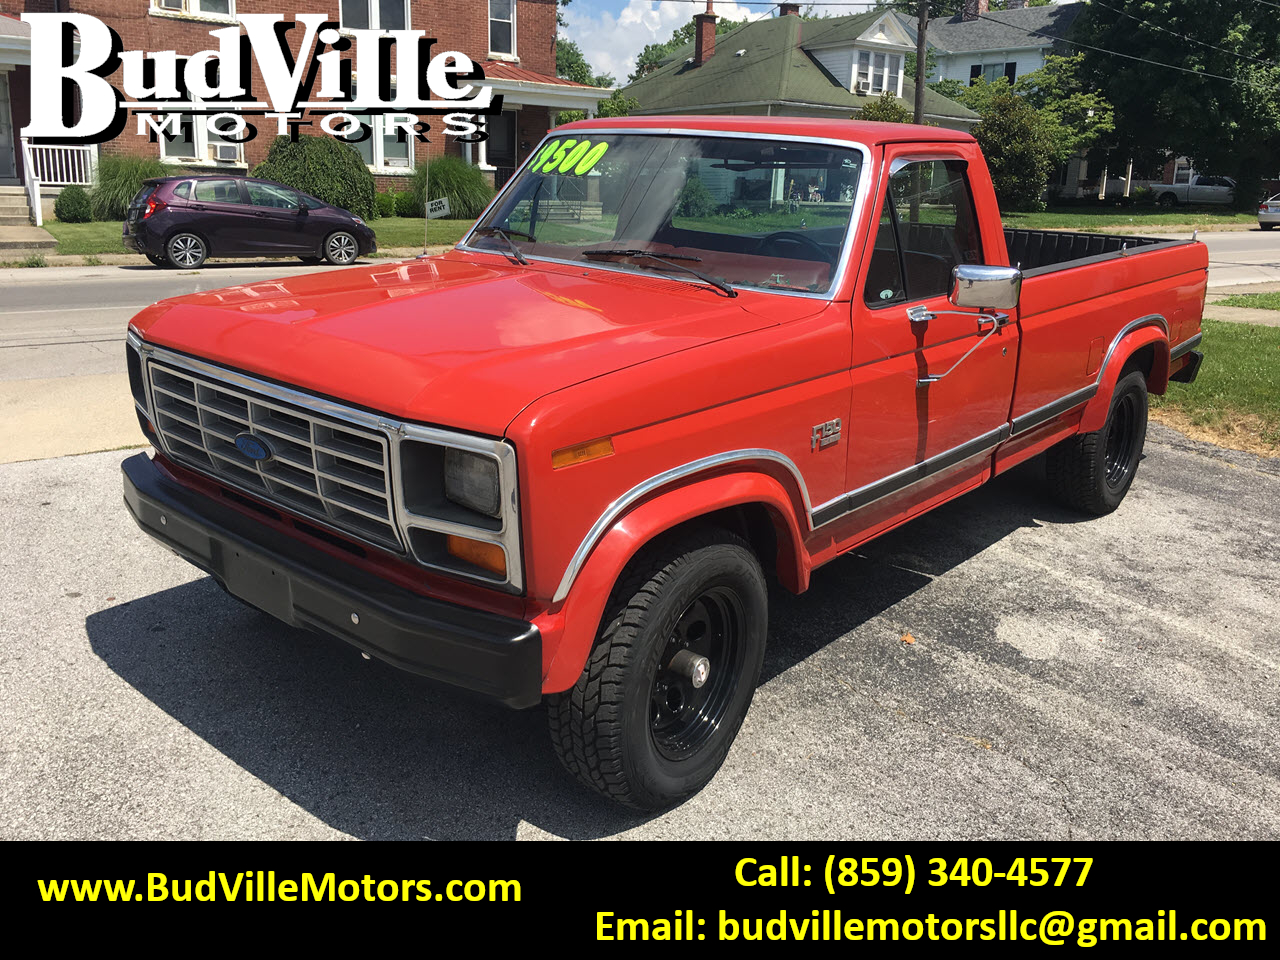 Budville Motors | Used Classic Cars Central Kentucky for Sale Paris KY